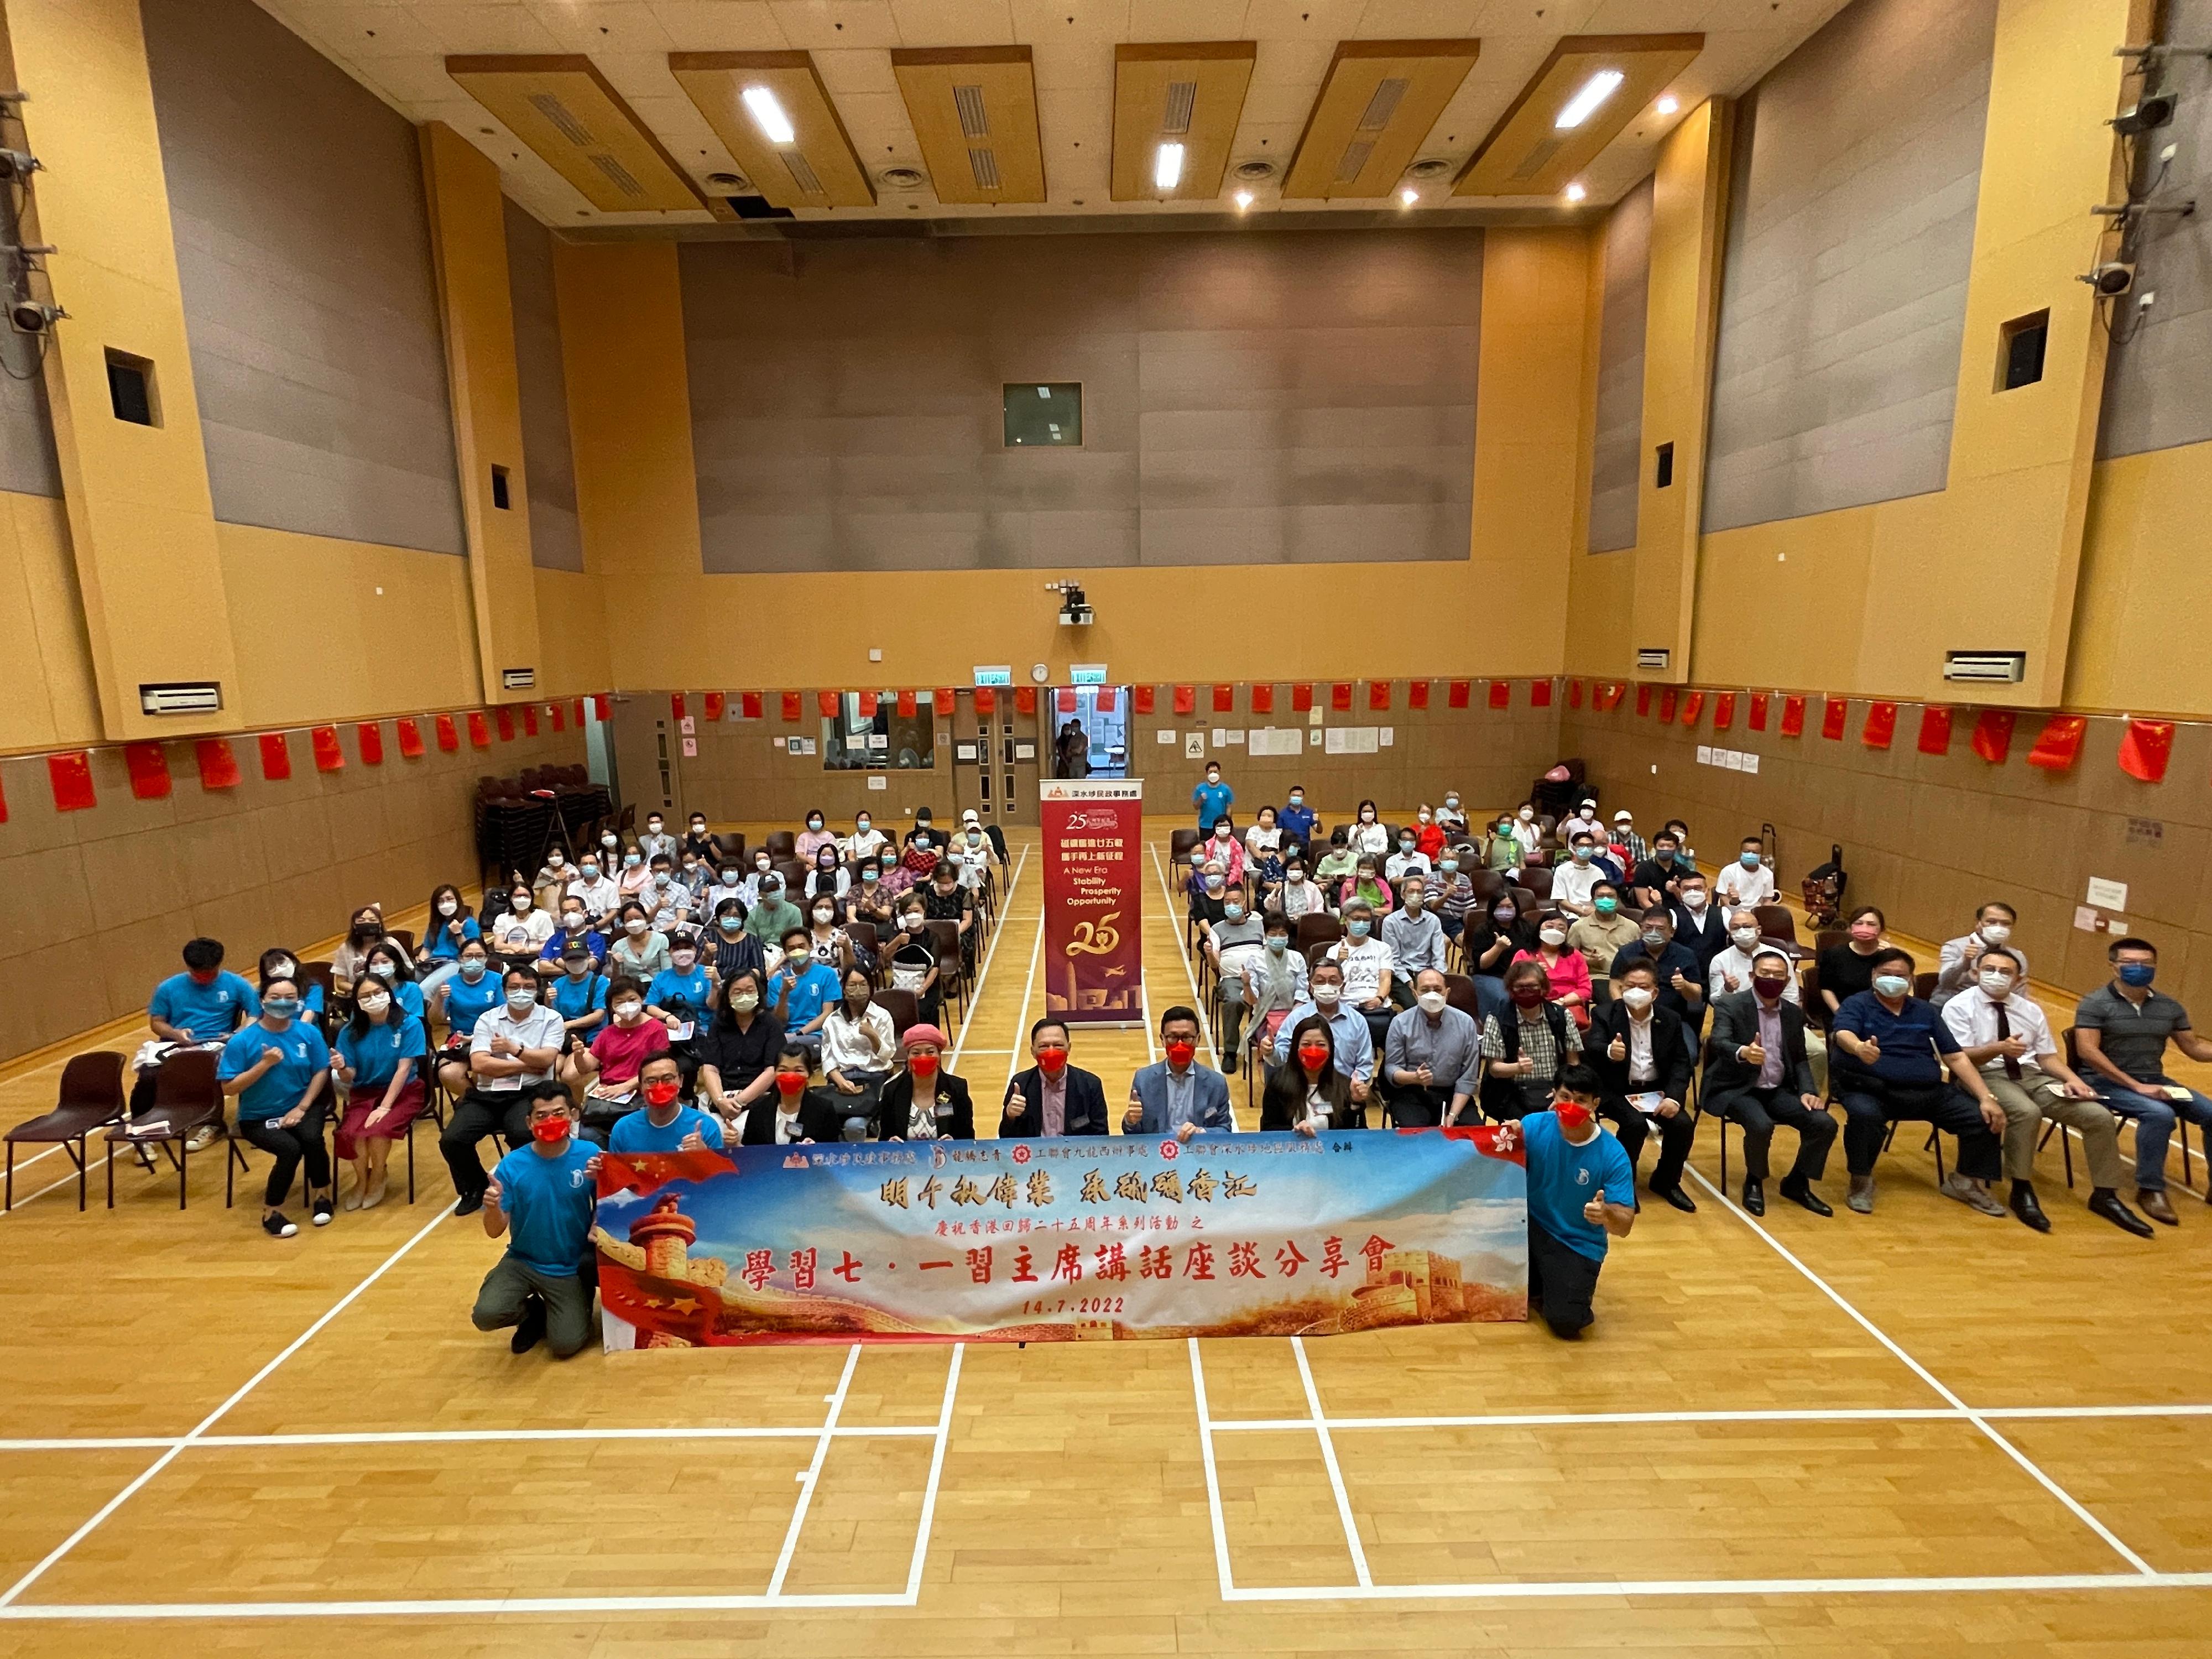 The Sham Shui Po District Office, together with the Ambitious and Energetic Youths Club, the Kowloon West Office of the Hong Kong Federation of Trade Unions (FTU) and the FTU Sham Shui Po District Service Office jointly held the "Session to Learn about President Xi's Speech on July 1" at the Mei Foo Community Hall today (July 14). Photo shows the District Officer (Sham Shui Po), Mr Paul Wong (first row, third right), together with other guests and participants at the session.